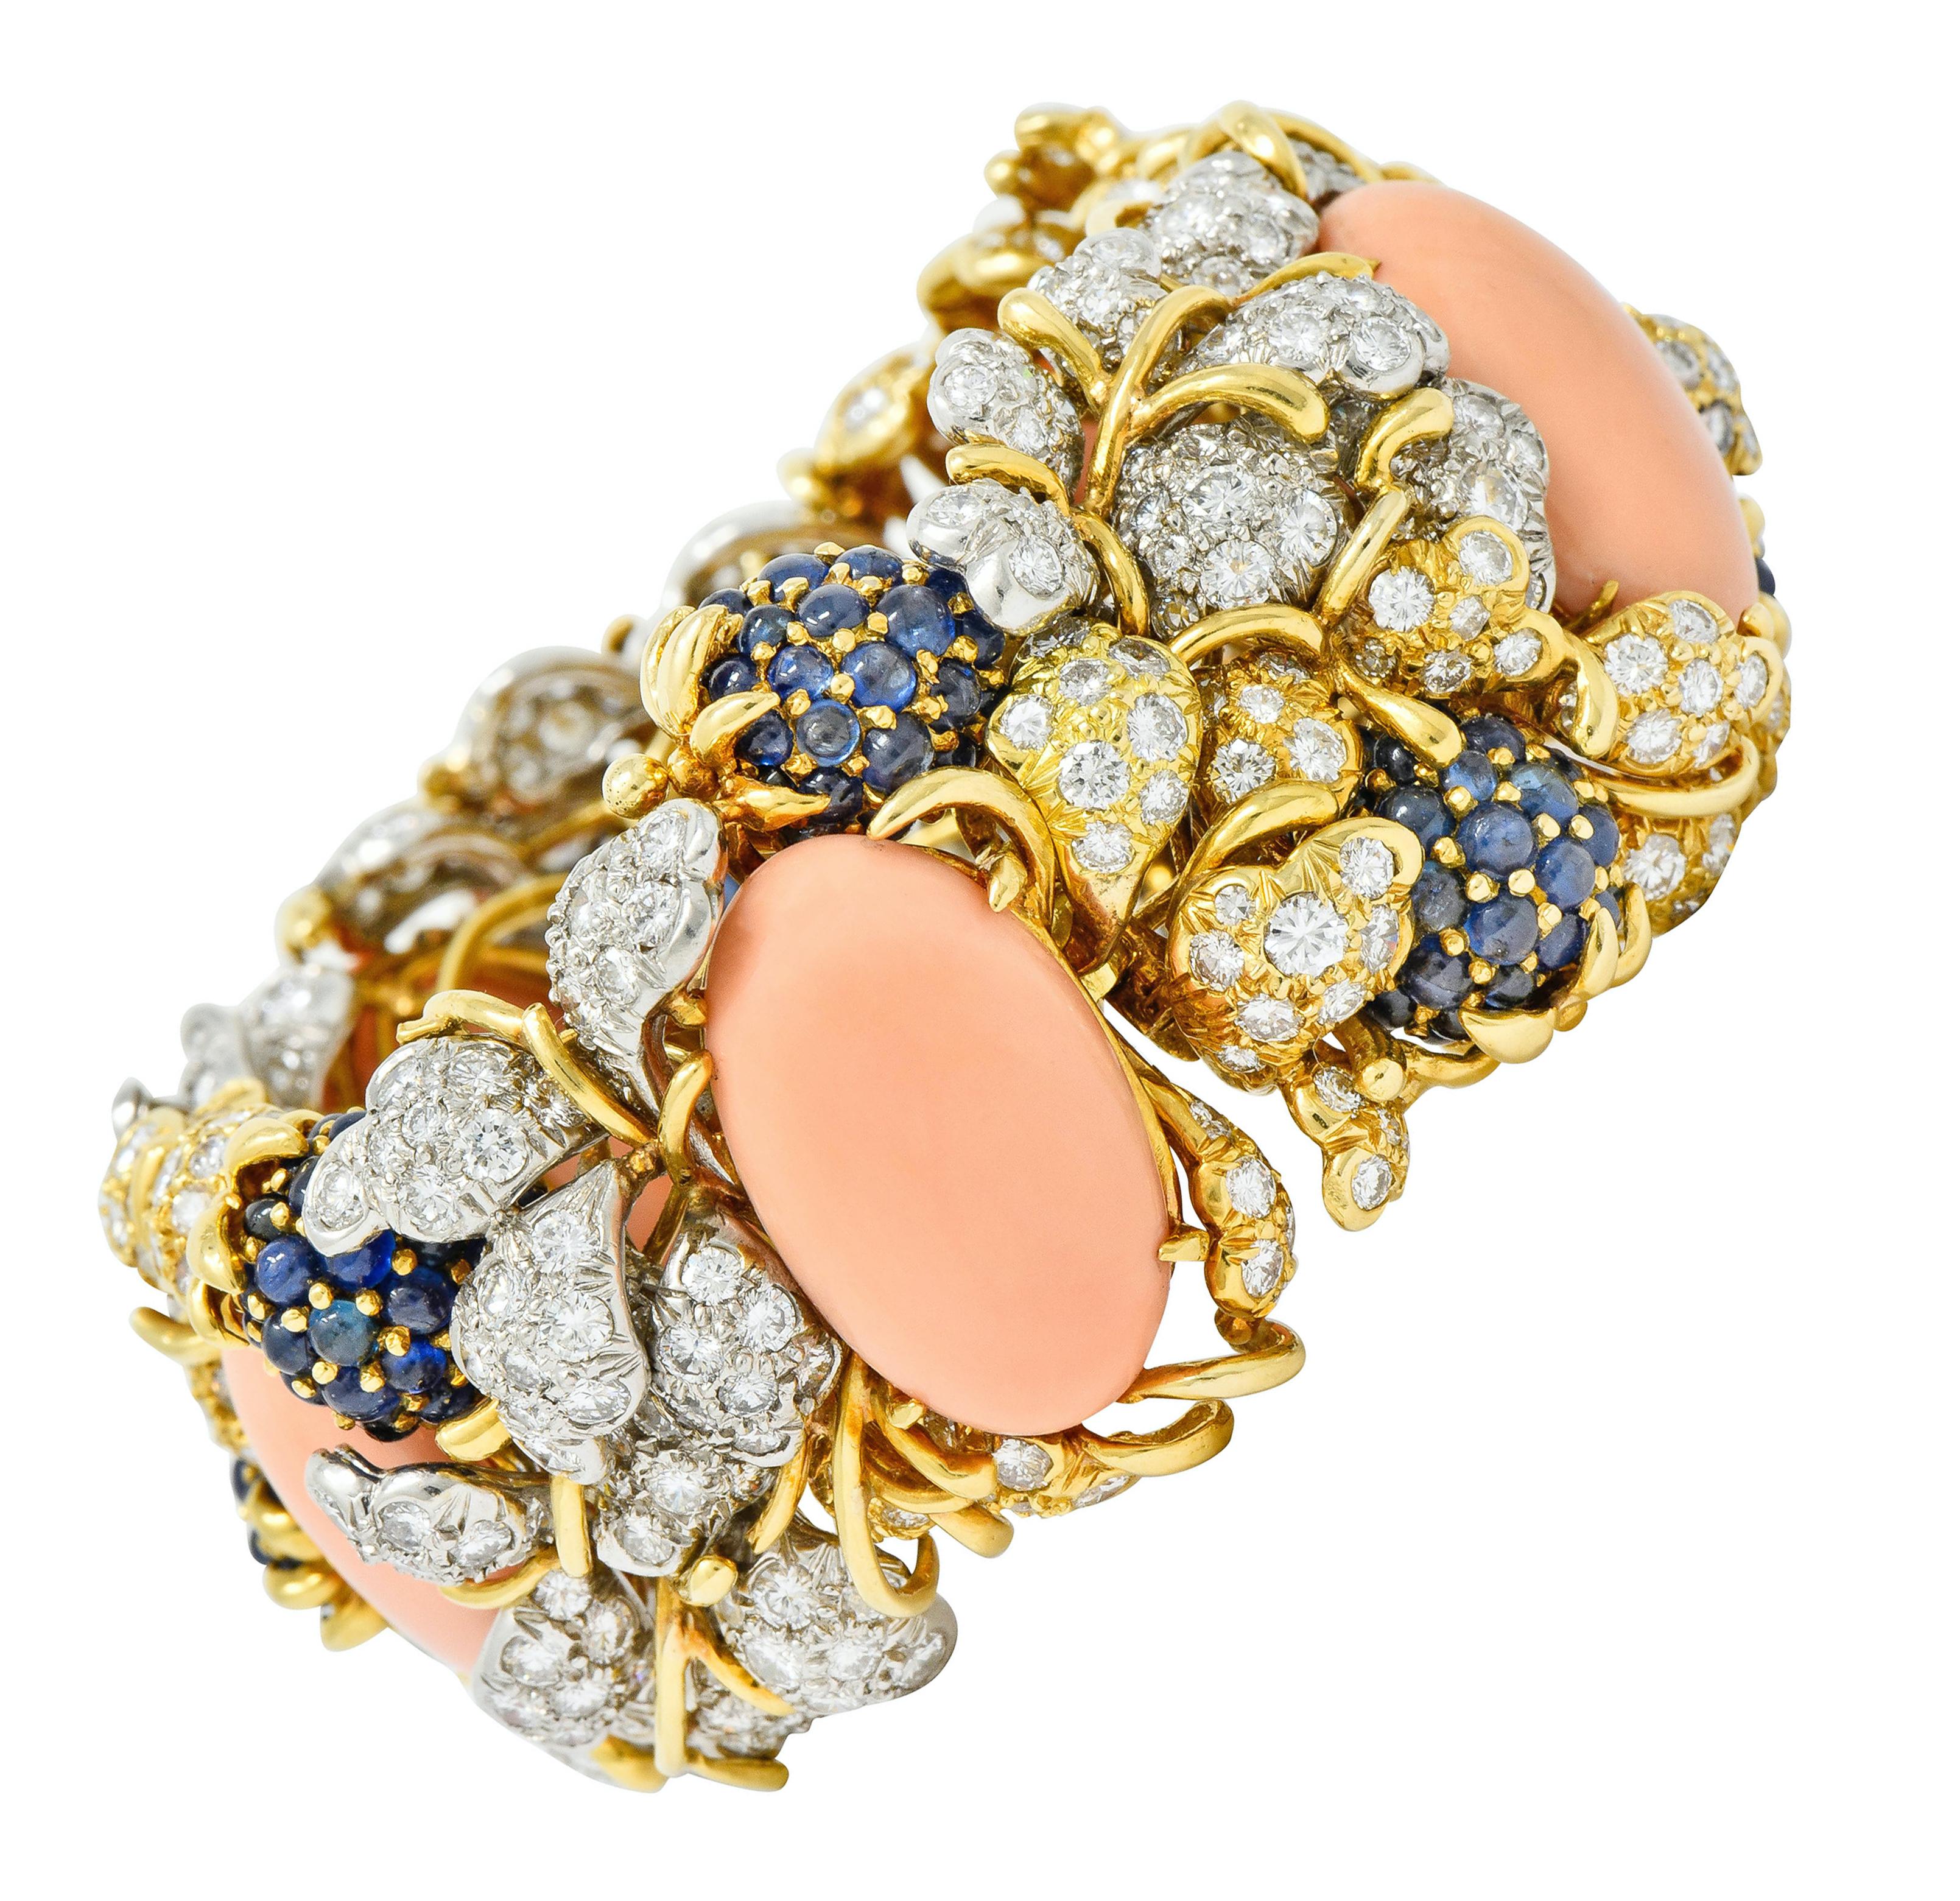 Wide bracelet designed as winding gold vines and gemmed ivy leaves with berry stations that form hidden segmentation that articulate slightly on a hinge

With five pastel orangey-pink coral cabochon prong set throughout and very well-matched,